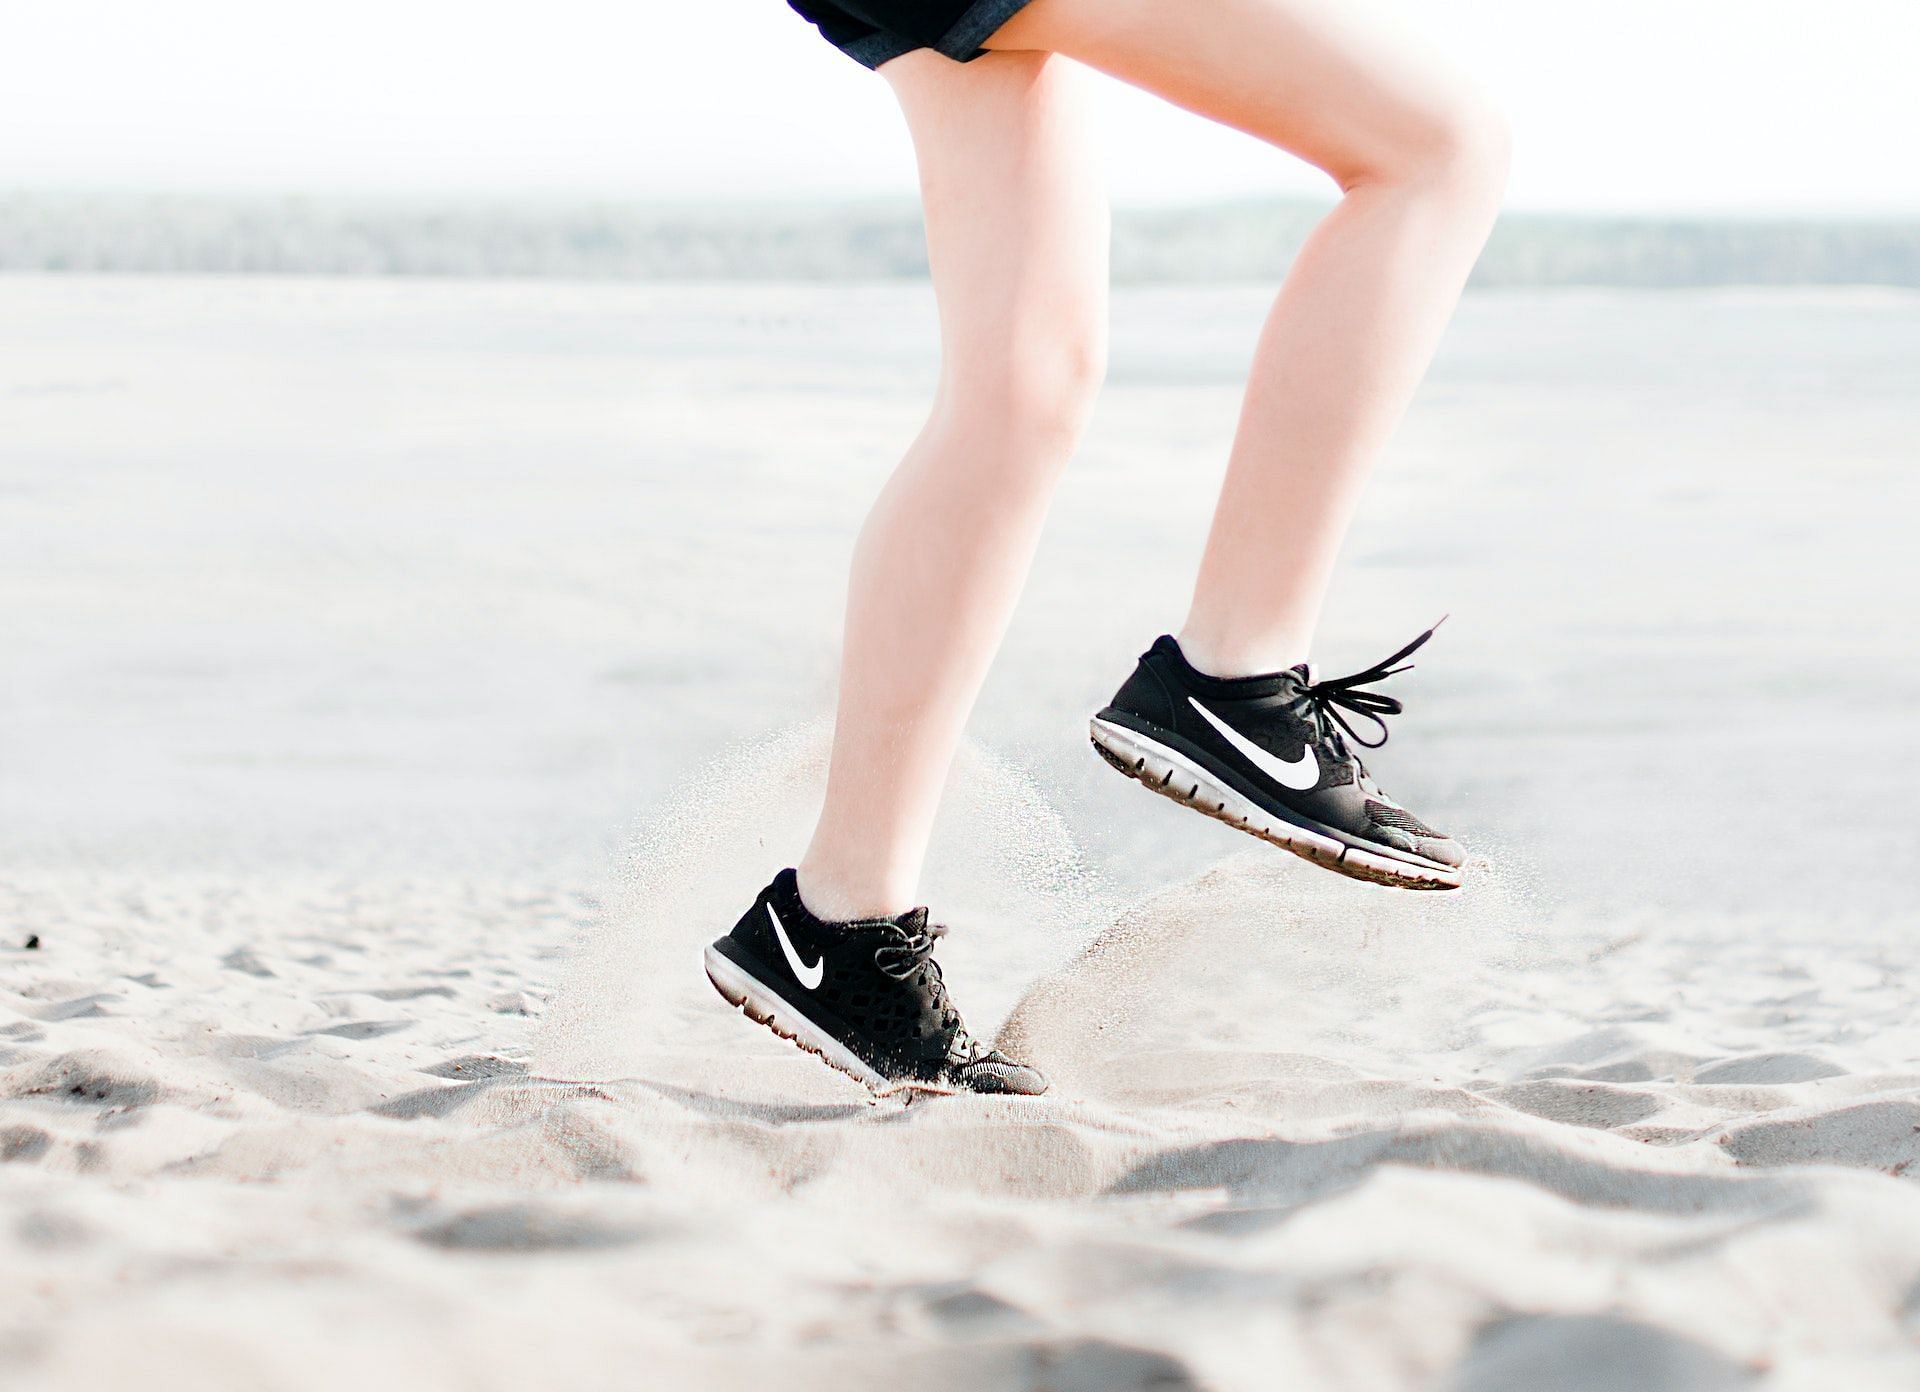 Mobility exercises strengthen the entire leg muscles. (Photo via Pexels/Dominika Roseclay)